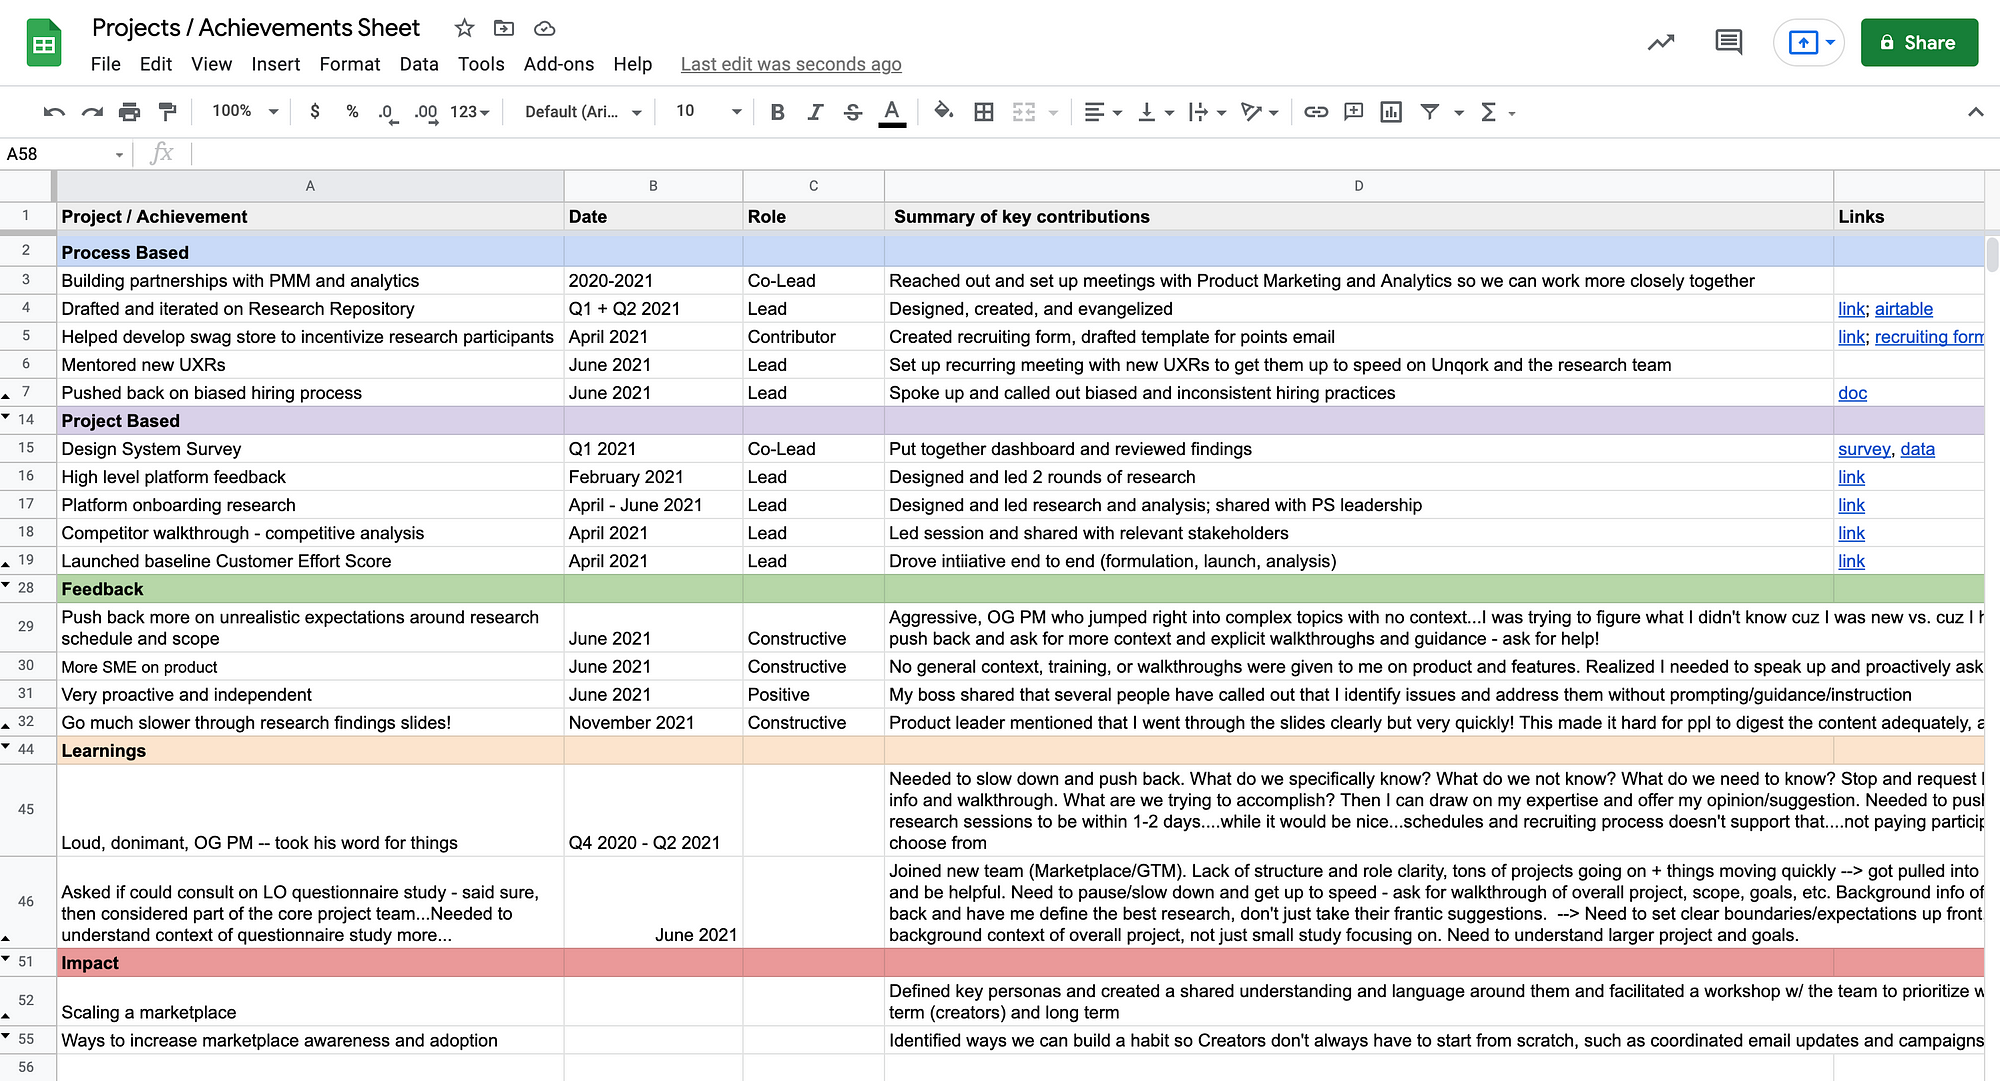 This shows a sample Google Sheet with sections for process based wins, project based wins, peer feedback, general learnings, and impact.